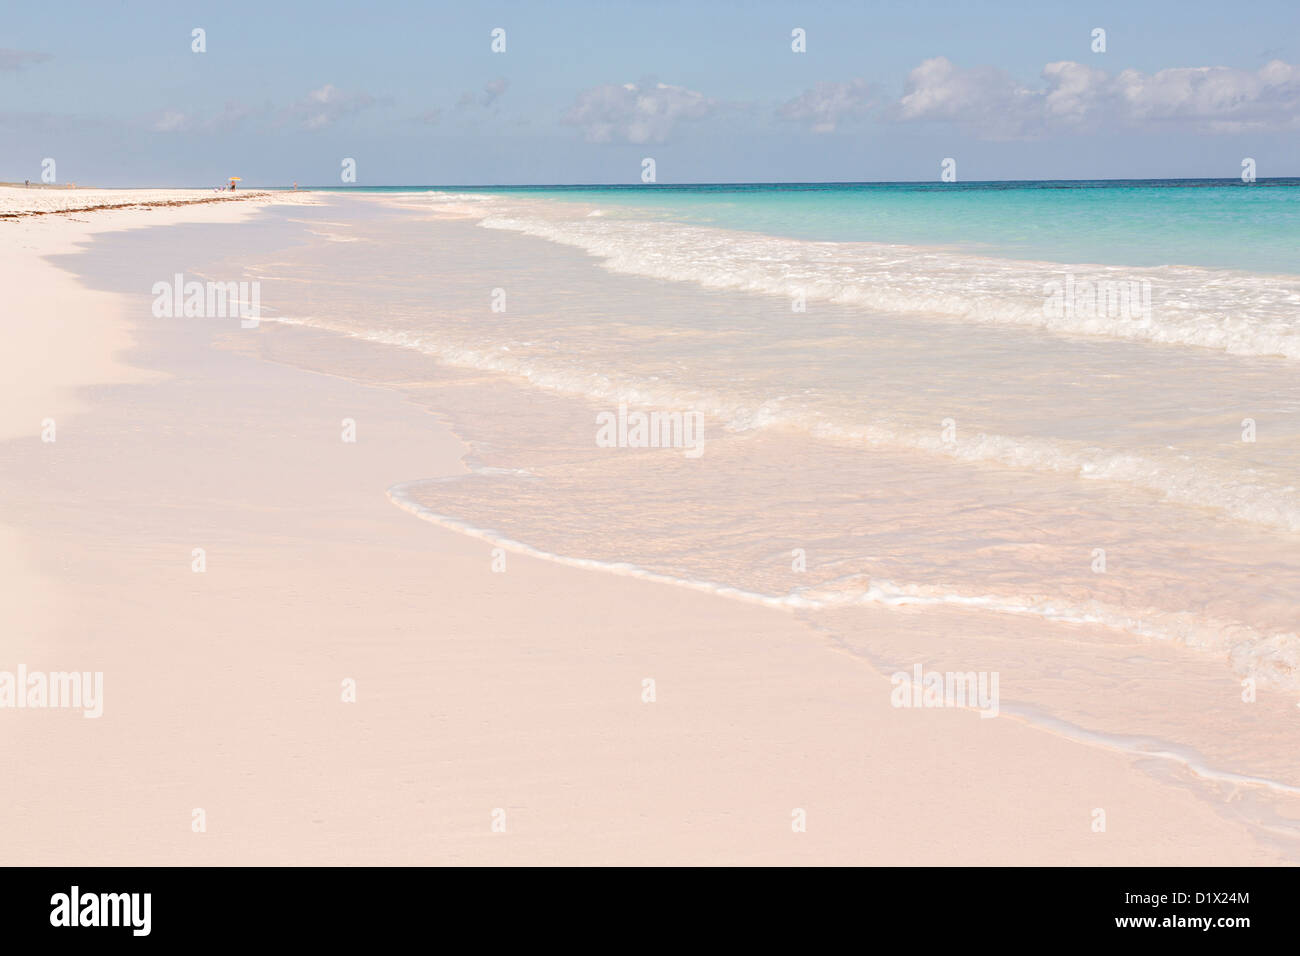 The pink sands beach in Dunmore Town, Harbour Island, The Bahamas Stock Photo